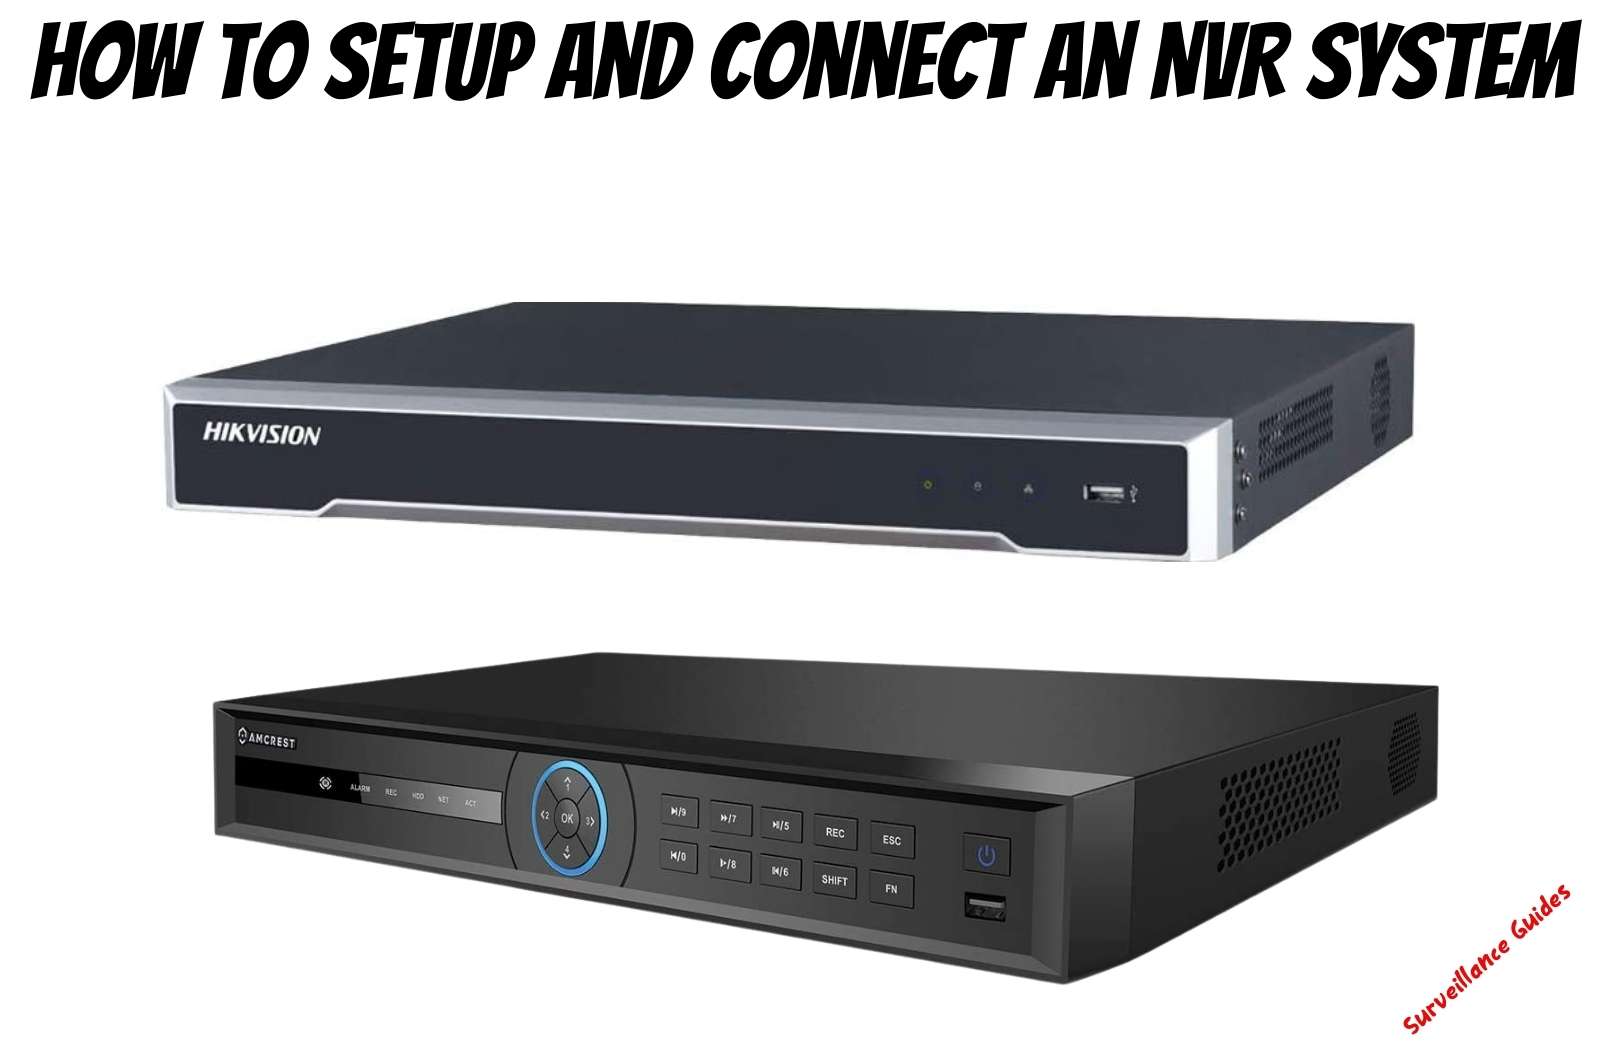 How to Setup and Connect an NVR System